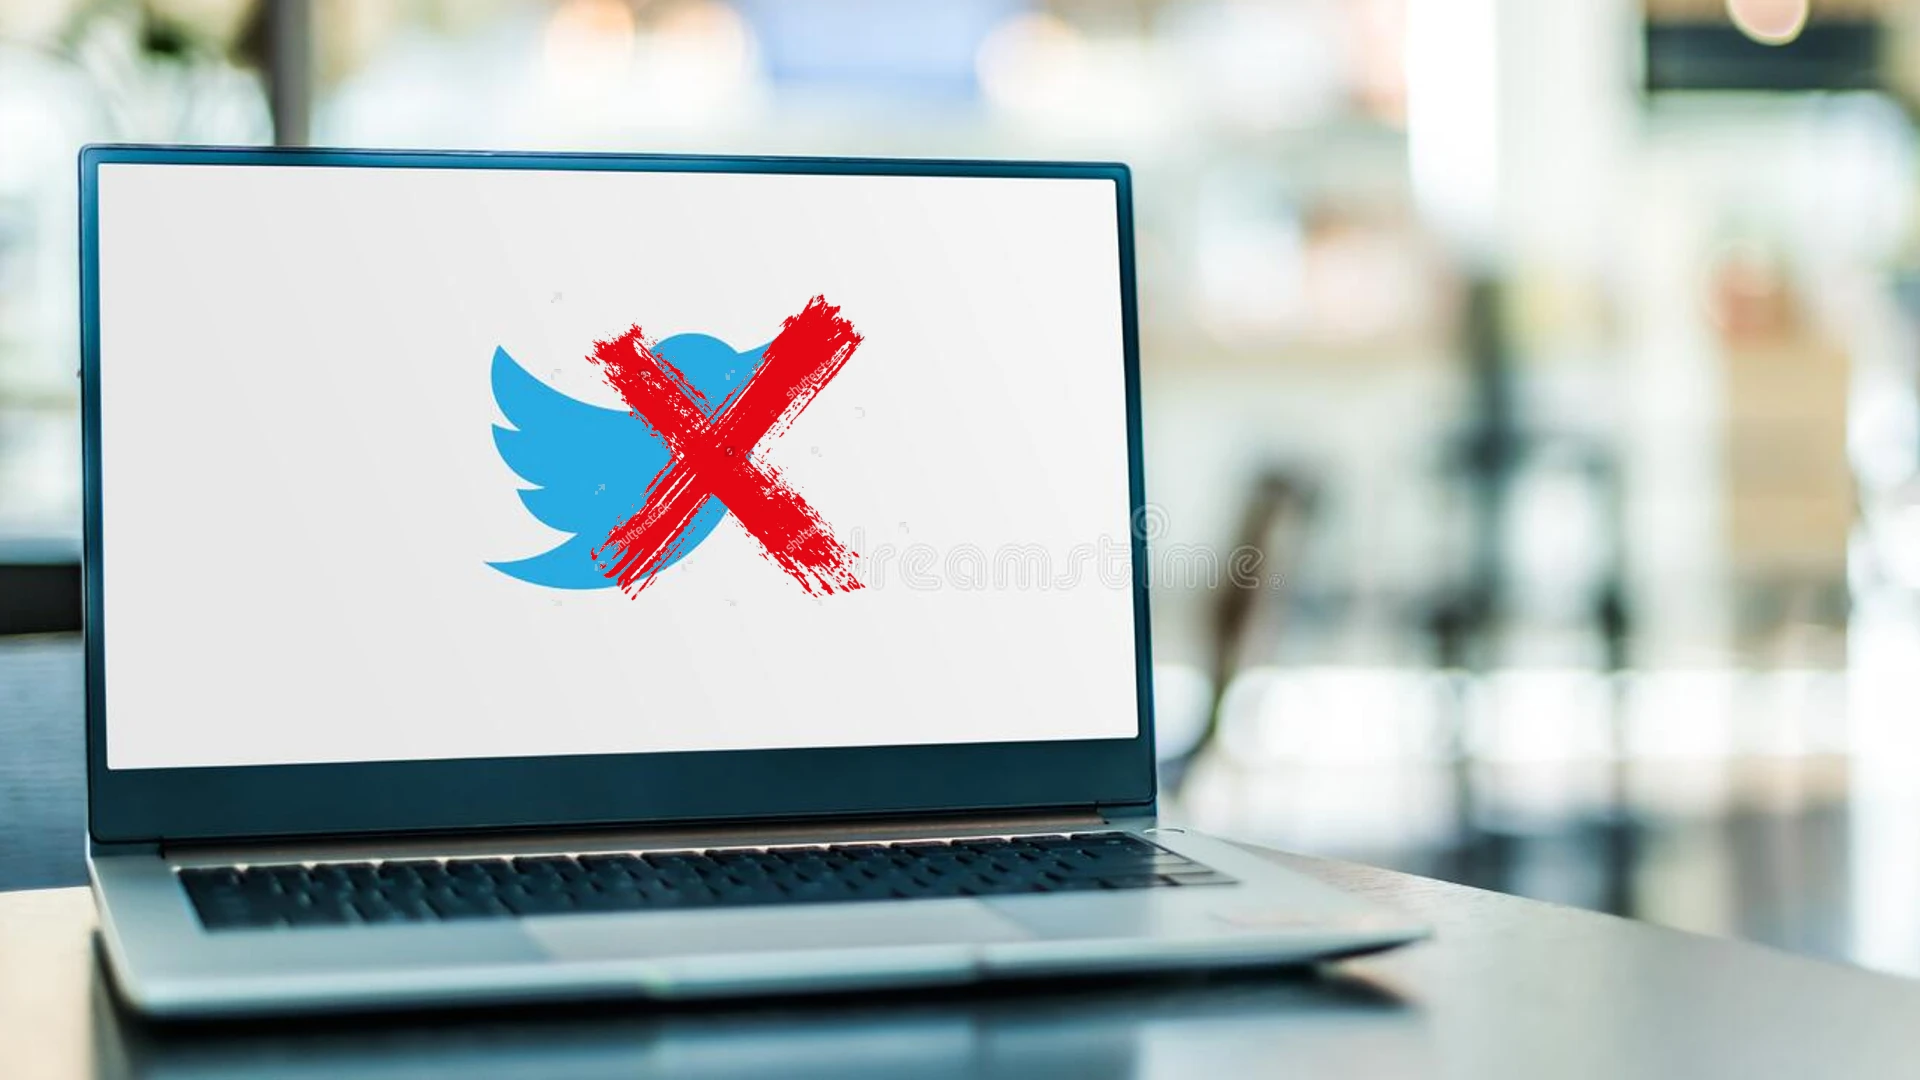 Want A Break With Twitter? Find A Complete Guide On How To Deactivate Your Account